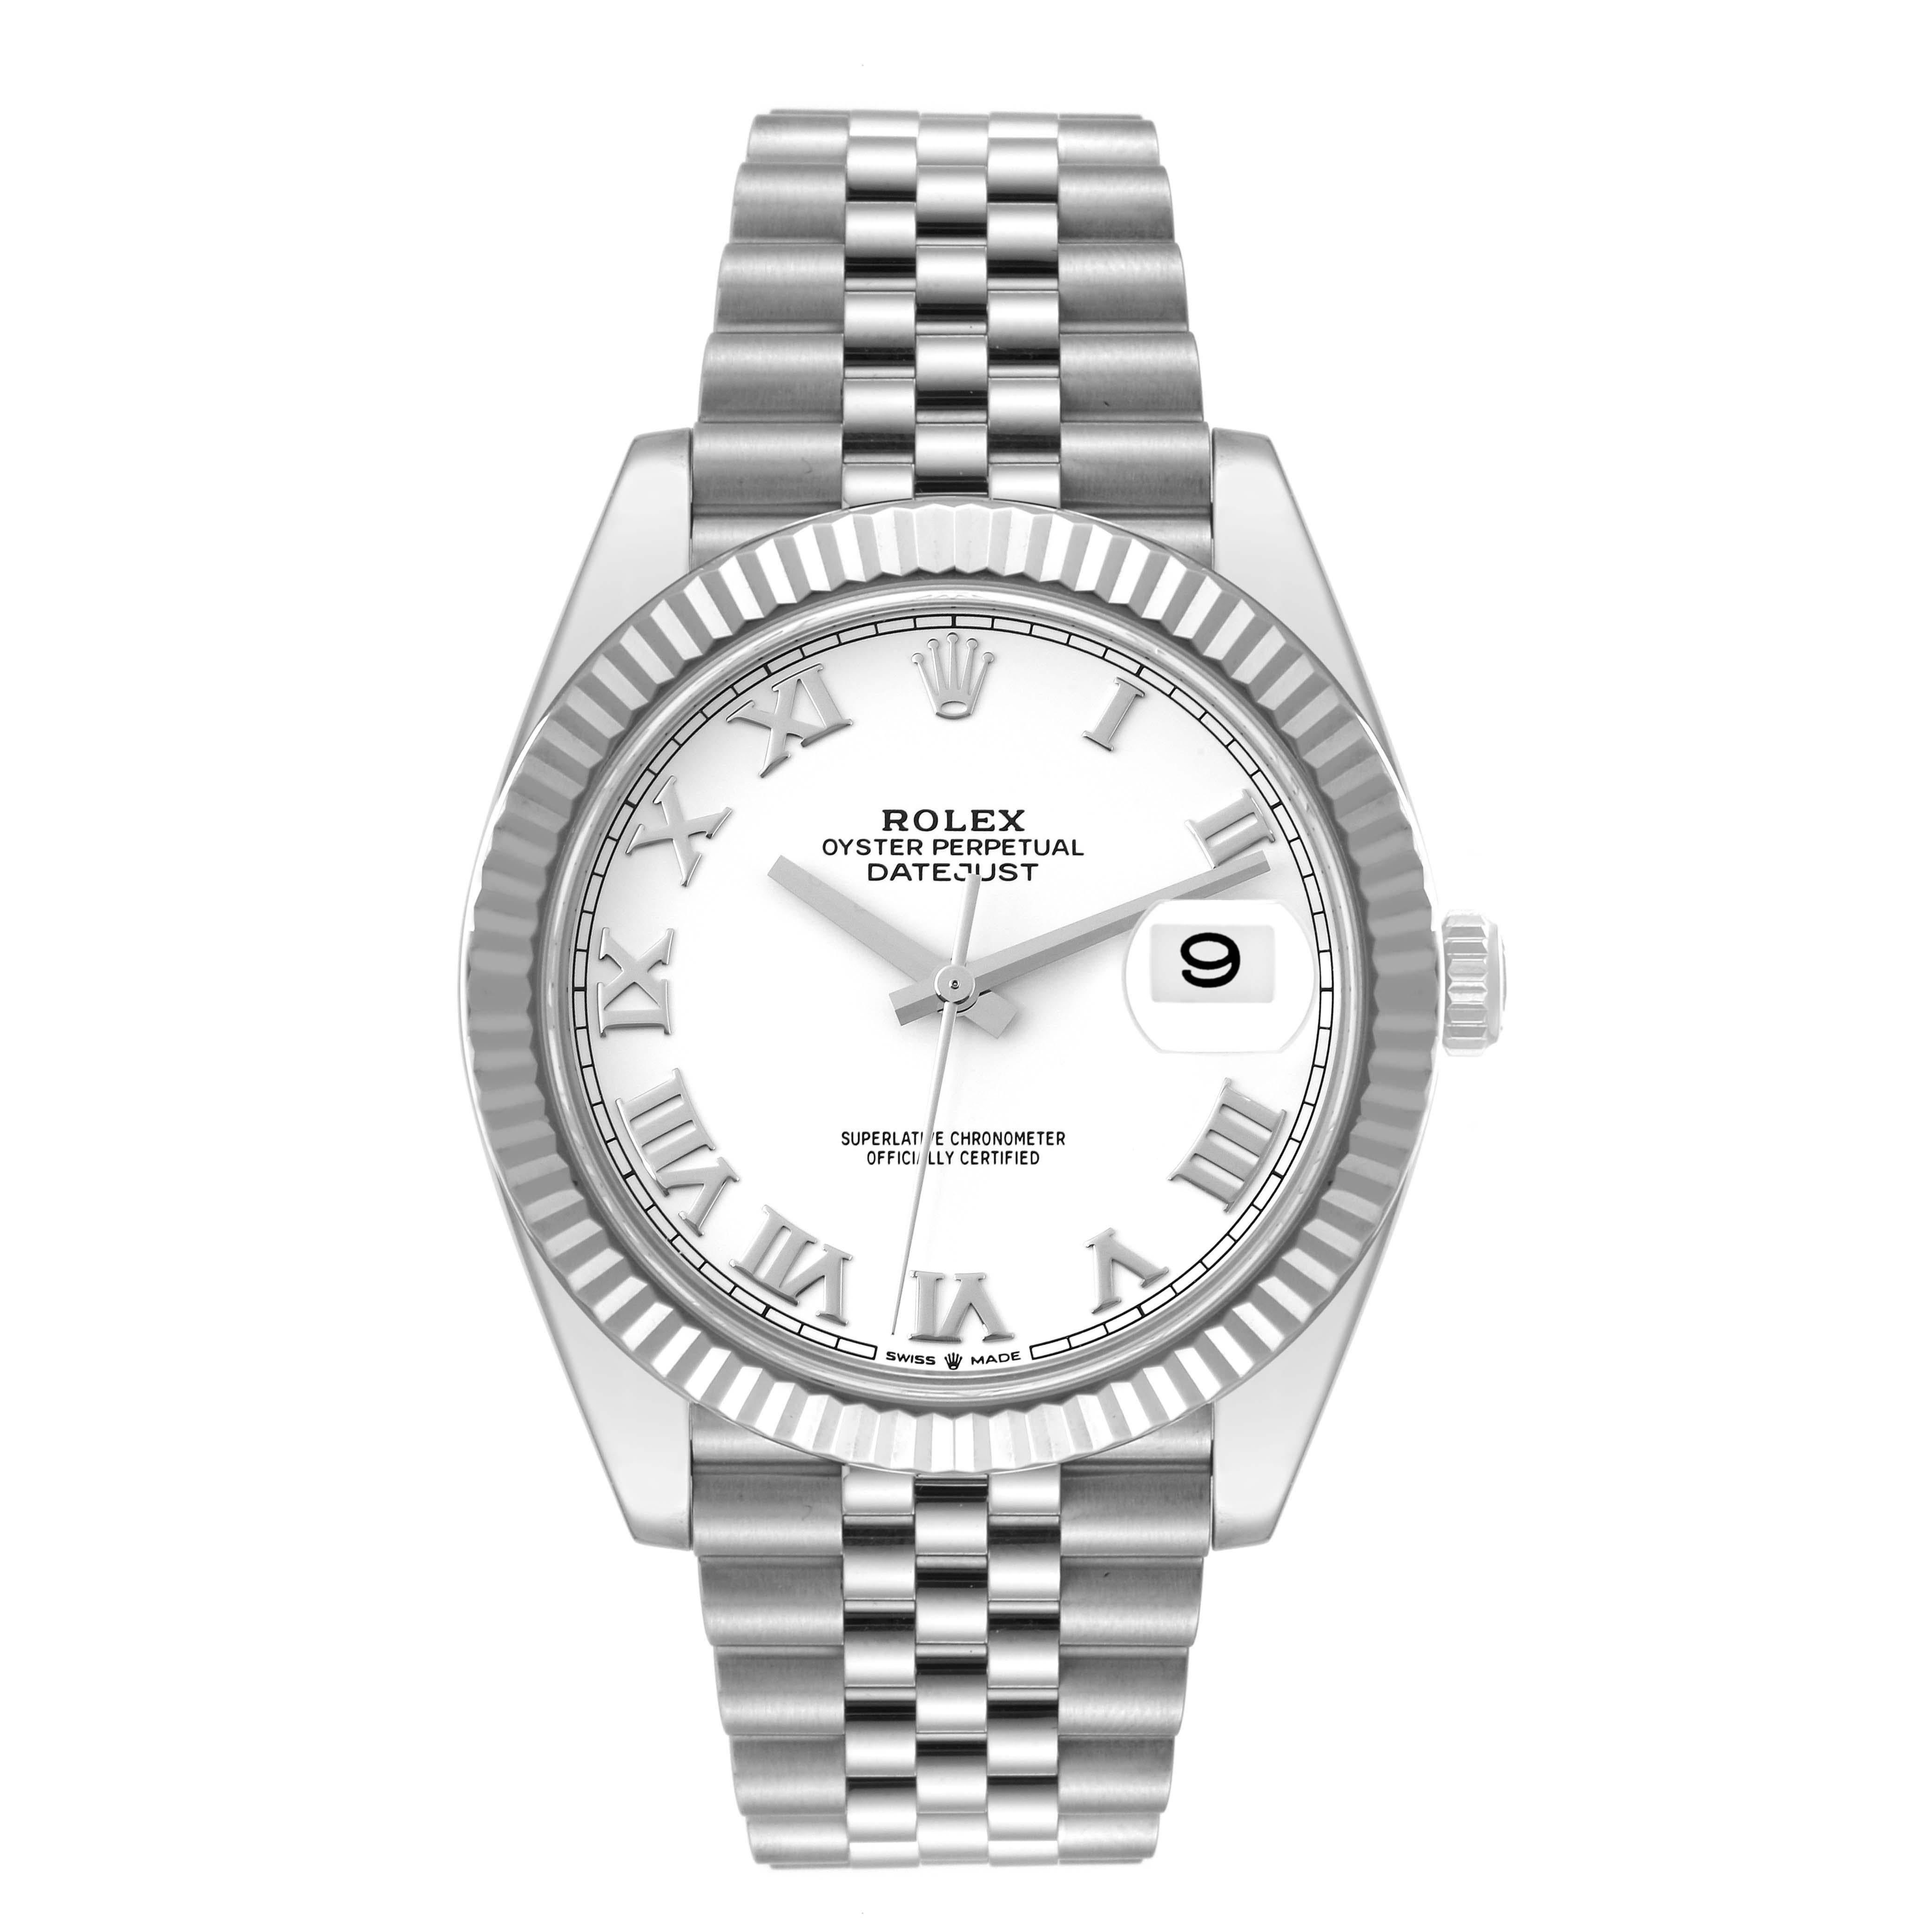 Rolex Datejust 41 White Dial Steel Mens Watch 126334 Box Card. Officially certified chronometer automatic self-winding movement. Stainless steel case 41 mm in diameter. Rolex logo on the crown. 18K white gold fluted bezel. Scratch resistant sapphire